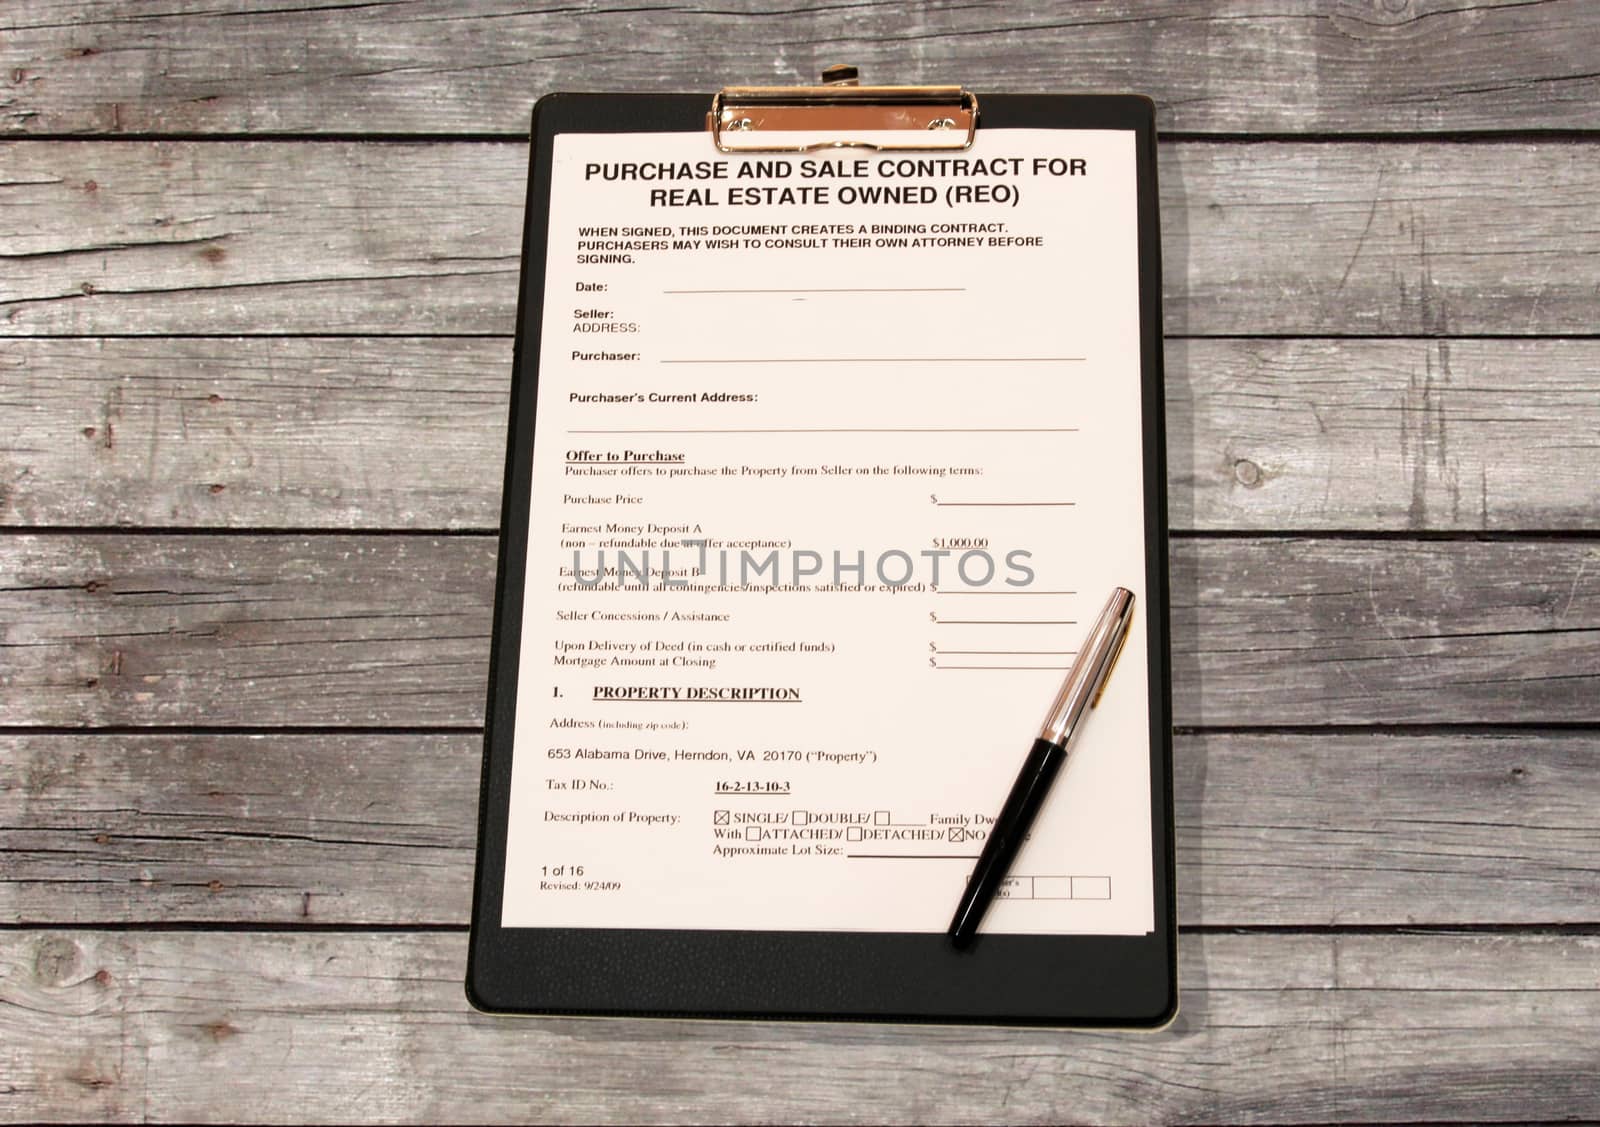 Form of contract with a black pen on a wooden table made of grey Board